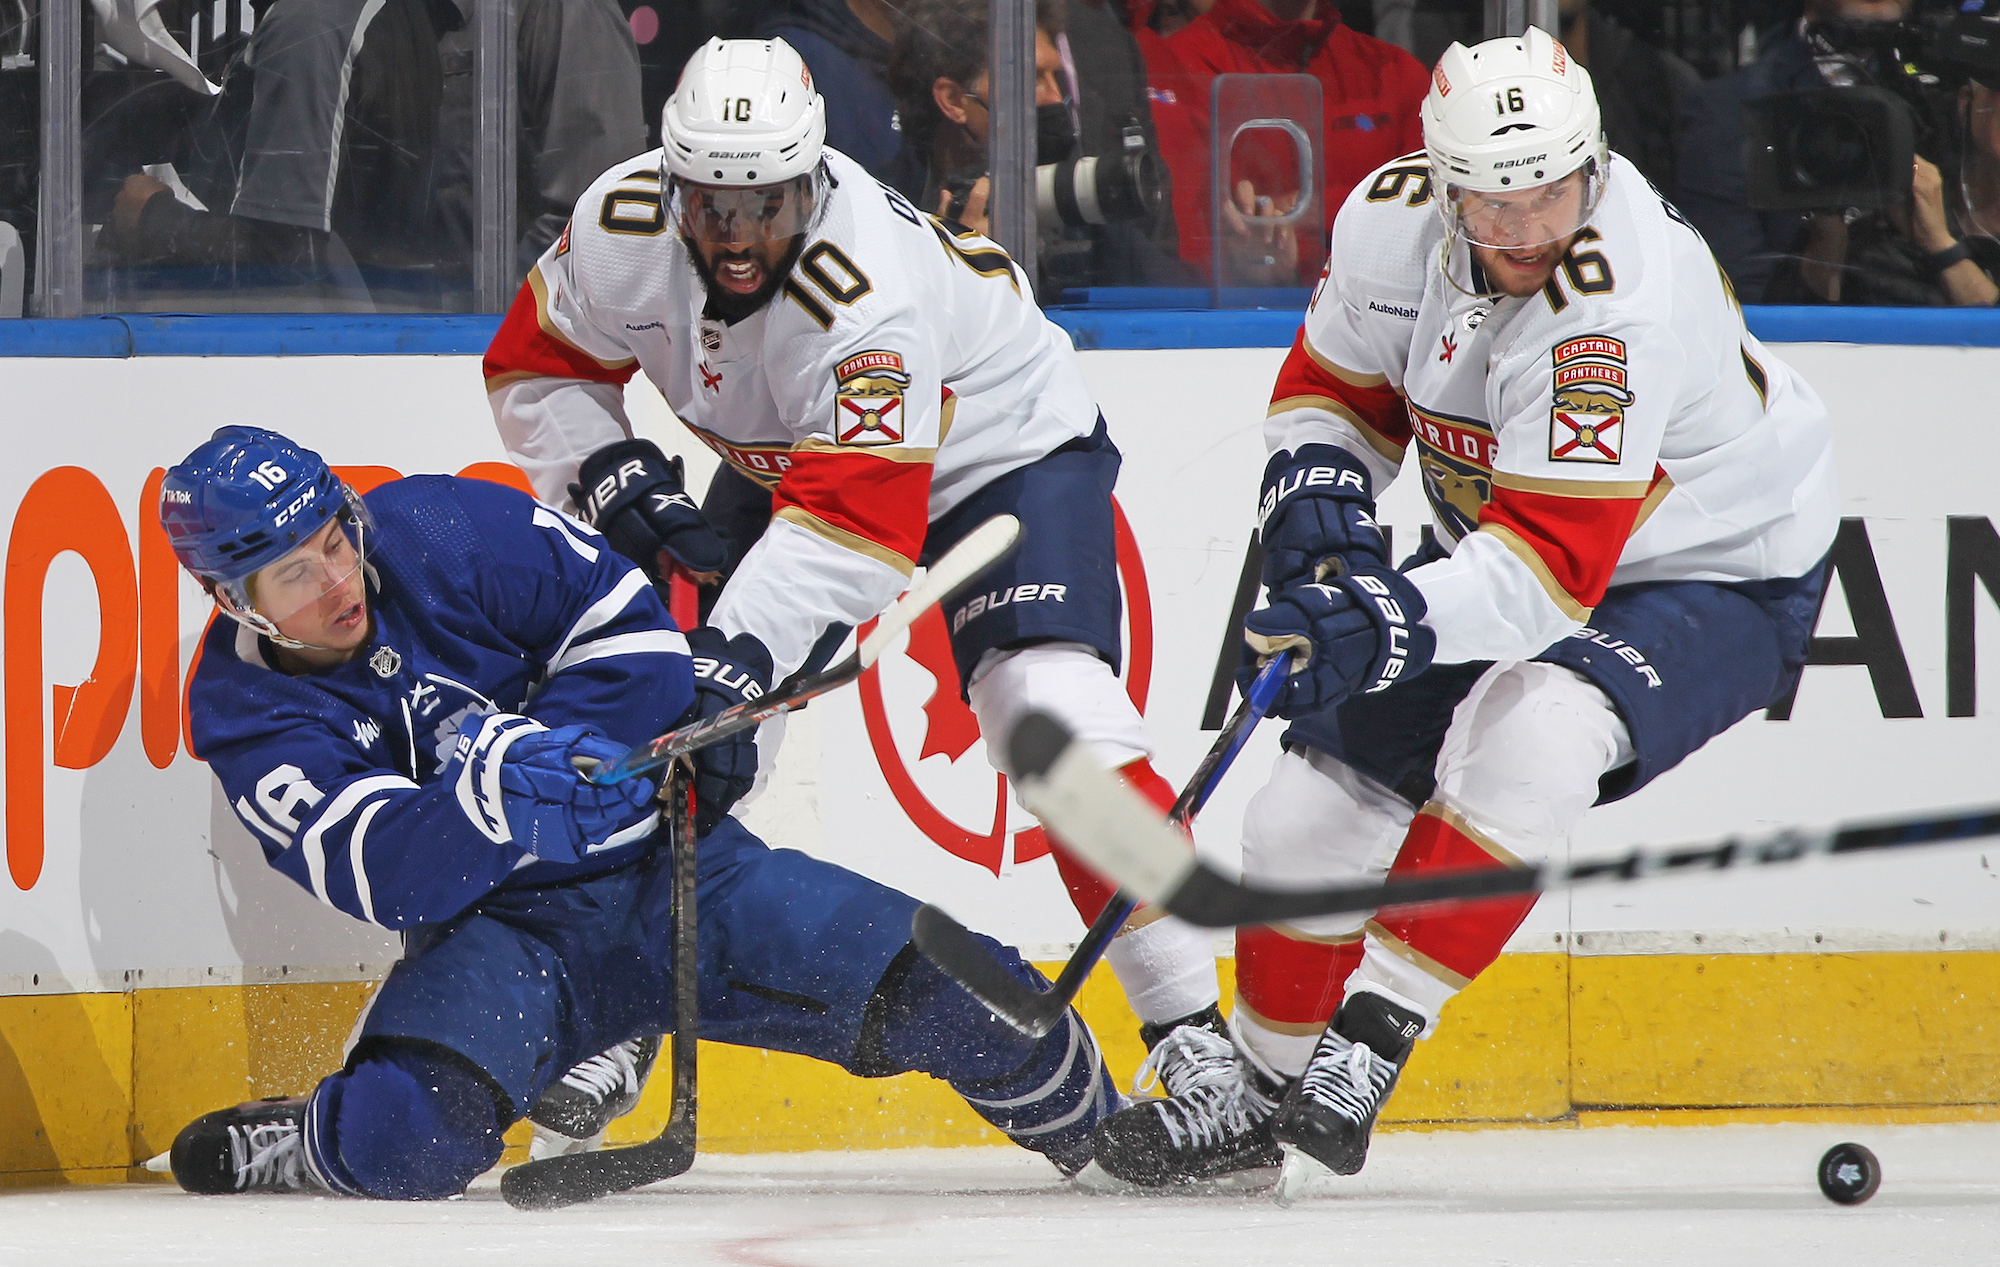 TORONTO, CANADA: Anthony Duclair #10 of the Florida Panthers battles against Mitchell Marner #16 of the Toronto Maple Leafs during Game Two of the Second Round of the 2023 Stanley Cup Playoffs at Scotiabank Arena on May 4, 2023 in Toronto, Ontario, Canada. (Photo by Claus Andersen/Getty Images) *** Local Caption *** Anthony Duclair; Mitchell Marner